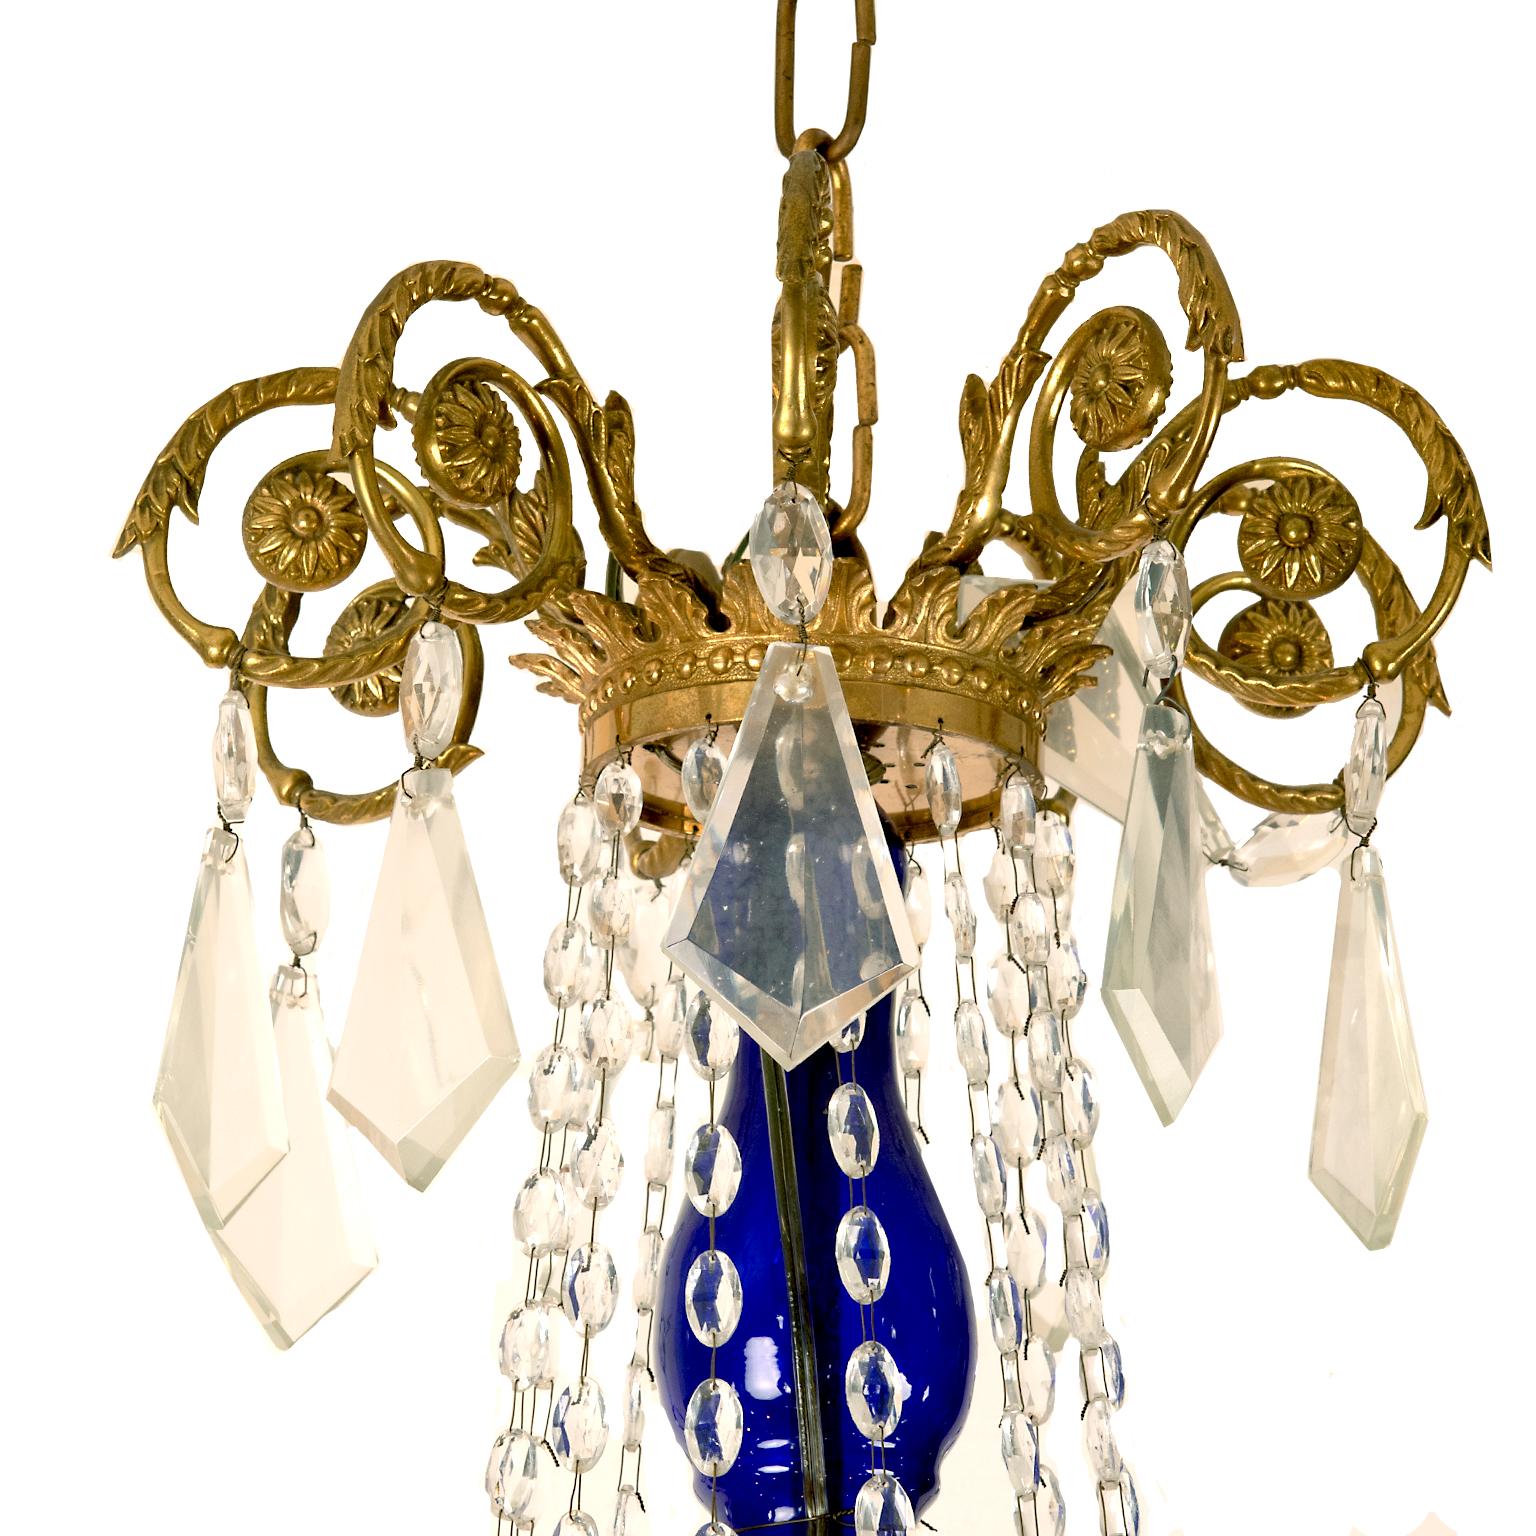 This magnificent large gilt bronze (ormolu) chandelier is decorated with clear crystal drops and cobalt blue glass bobeche, column and decorative hanging ball. It comes from a magnificent home in Toronto’s
the Bridal Path neighborhood. It is wired